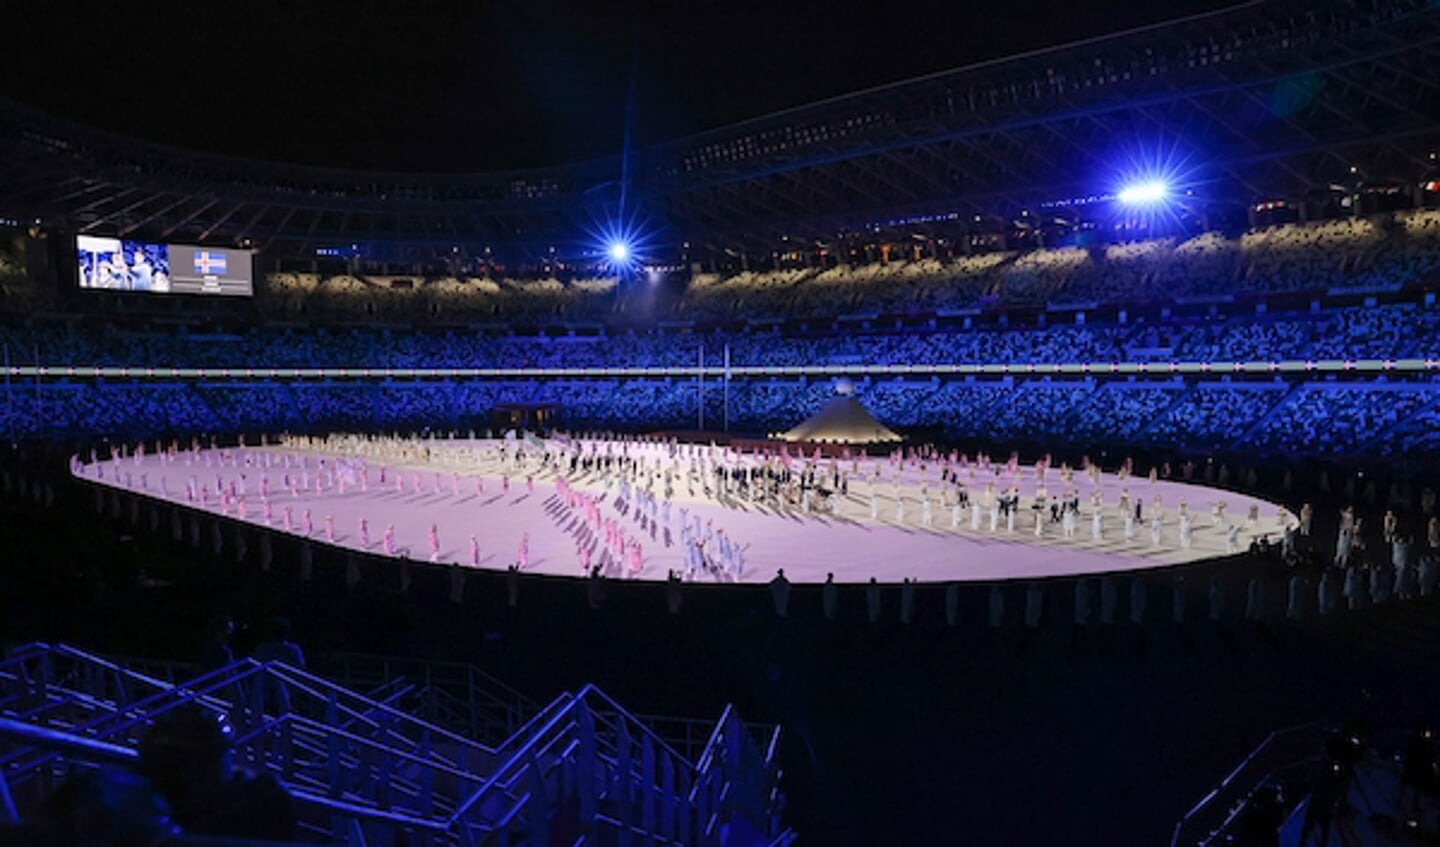 Opening Ceremony,
Olympic Games Tokyo 2021
© Hippo Foto - Dirk Caremans
23/07/2021